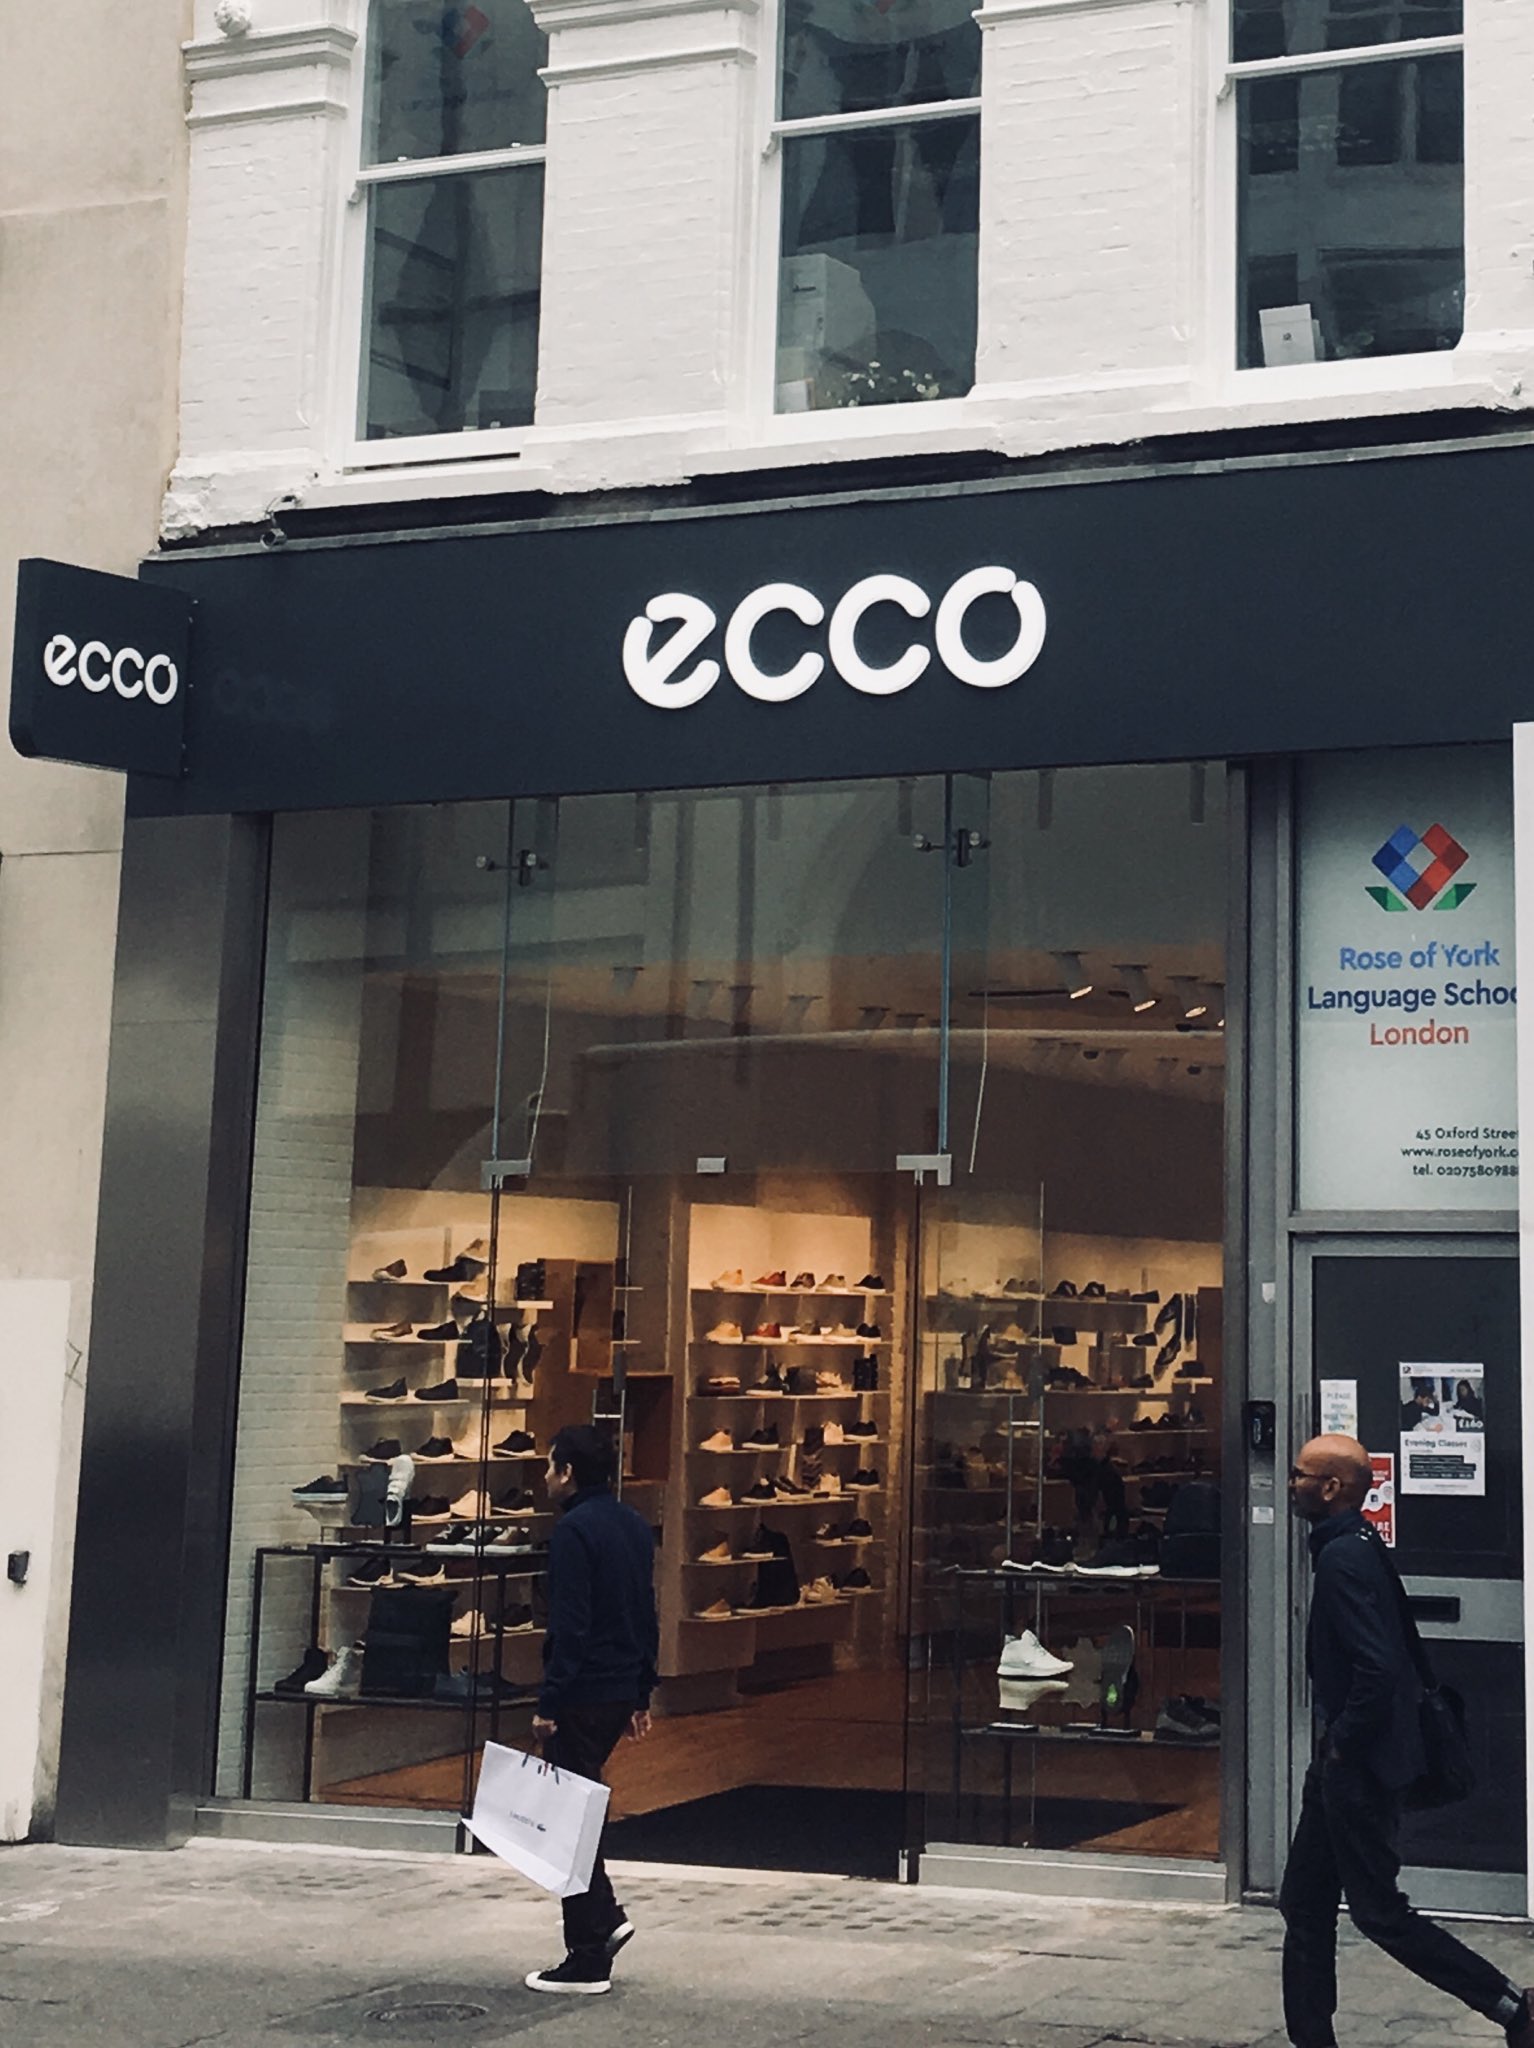 David Carlsson on Twitter: "The latest ⁦@ECCOshoes⁩ just opened on Street, advised by ⁦@Colliers_London⁩. Further opportunities the UK are being identified. #Ecco #Shoes #London https://t.co/hM6m6cpEhU" / Twitter